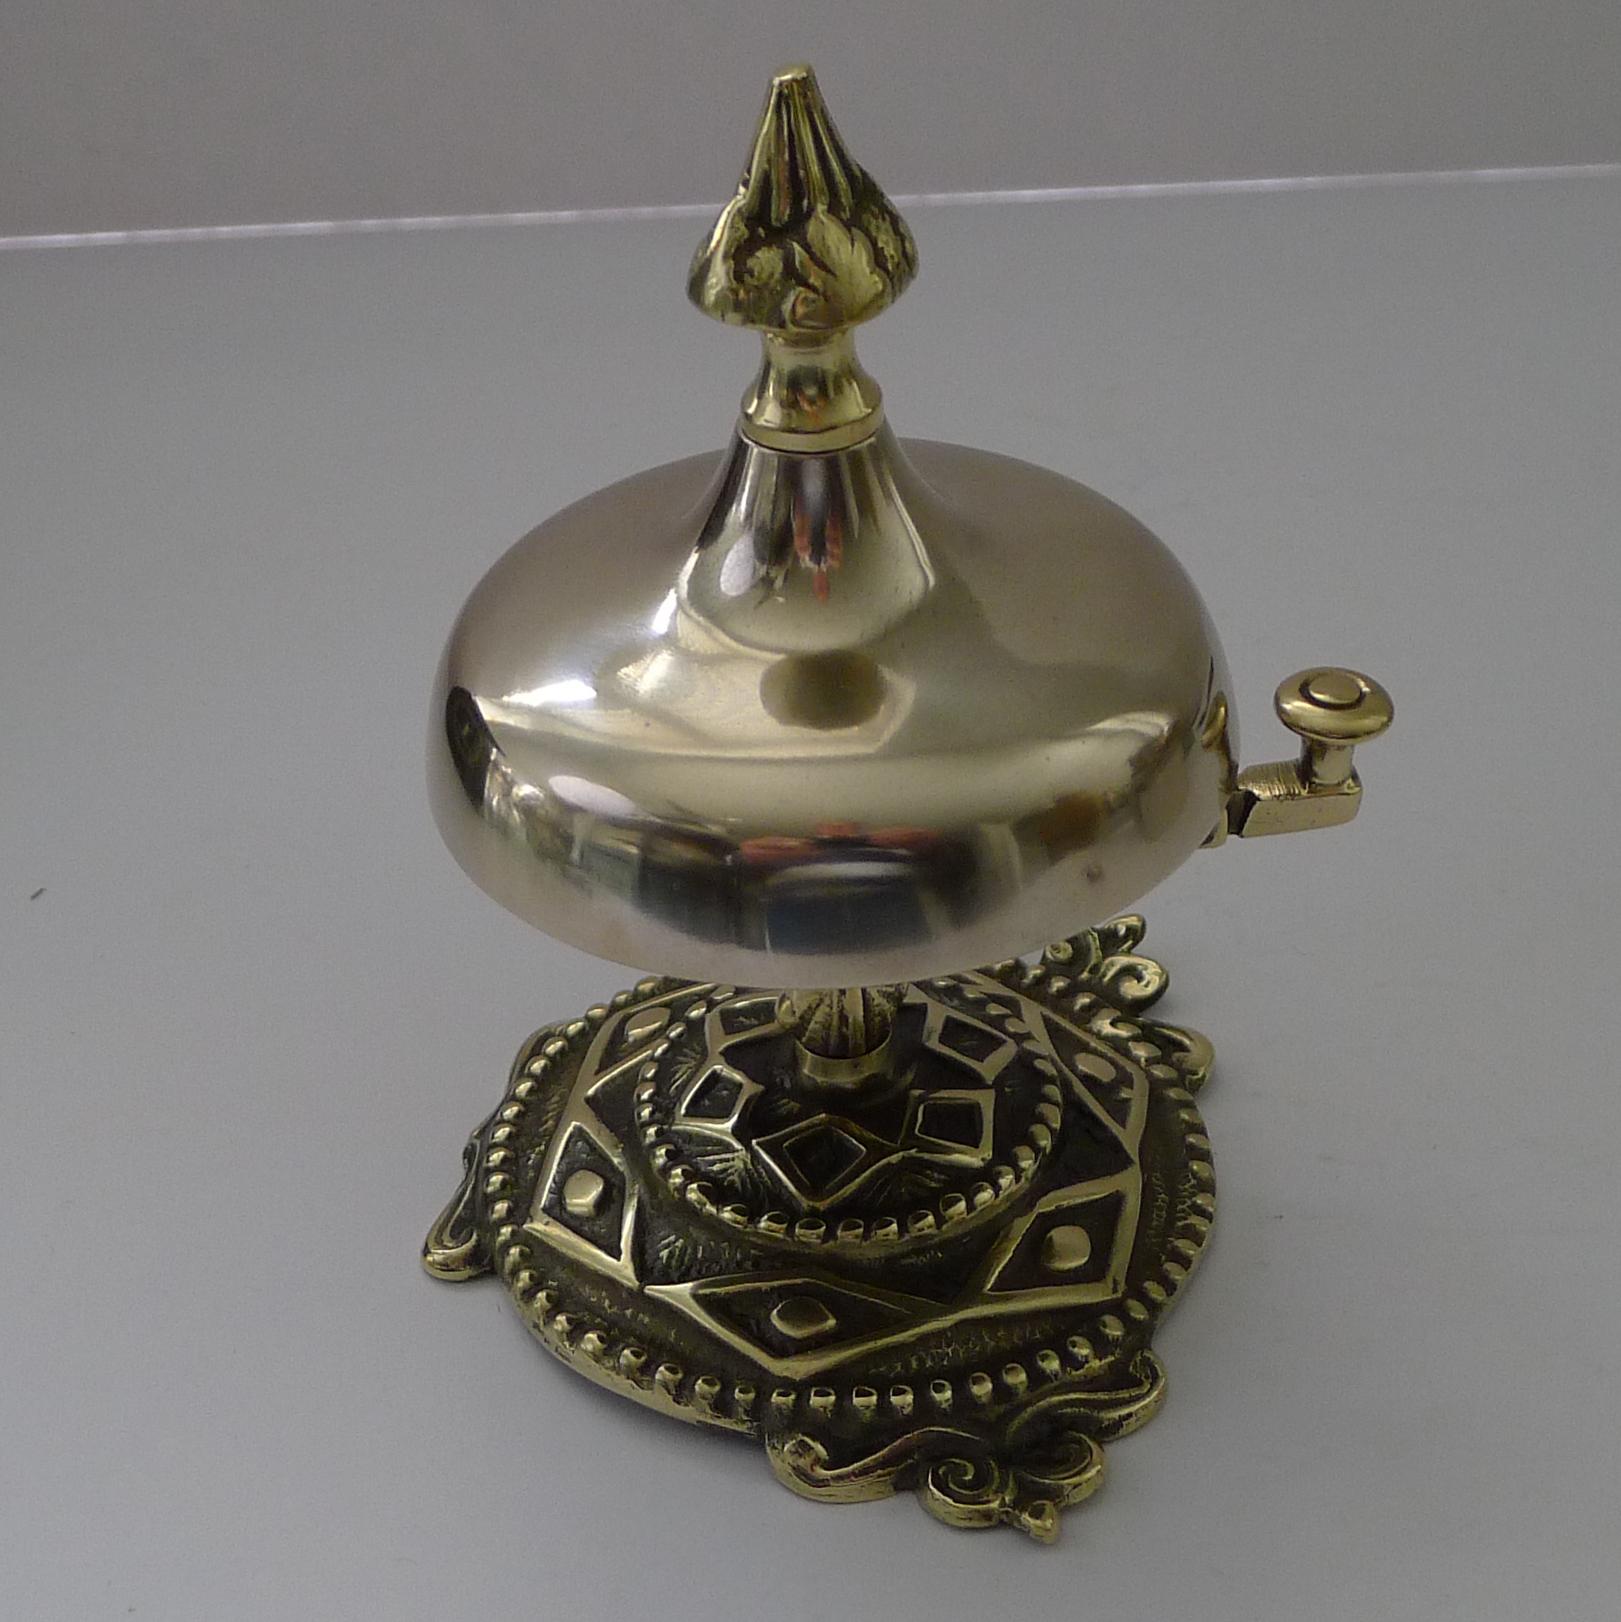 A wonderful and highly decorative desk or counter bell, my favourite kind with the more unusual clapper to the side rather than the ones you ring from the top. The hinged clapper is released and gives a clear and authoritative ring.

A true